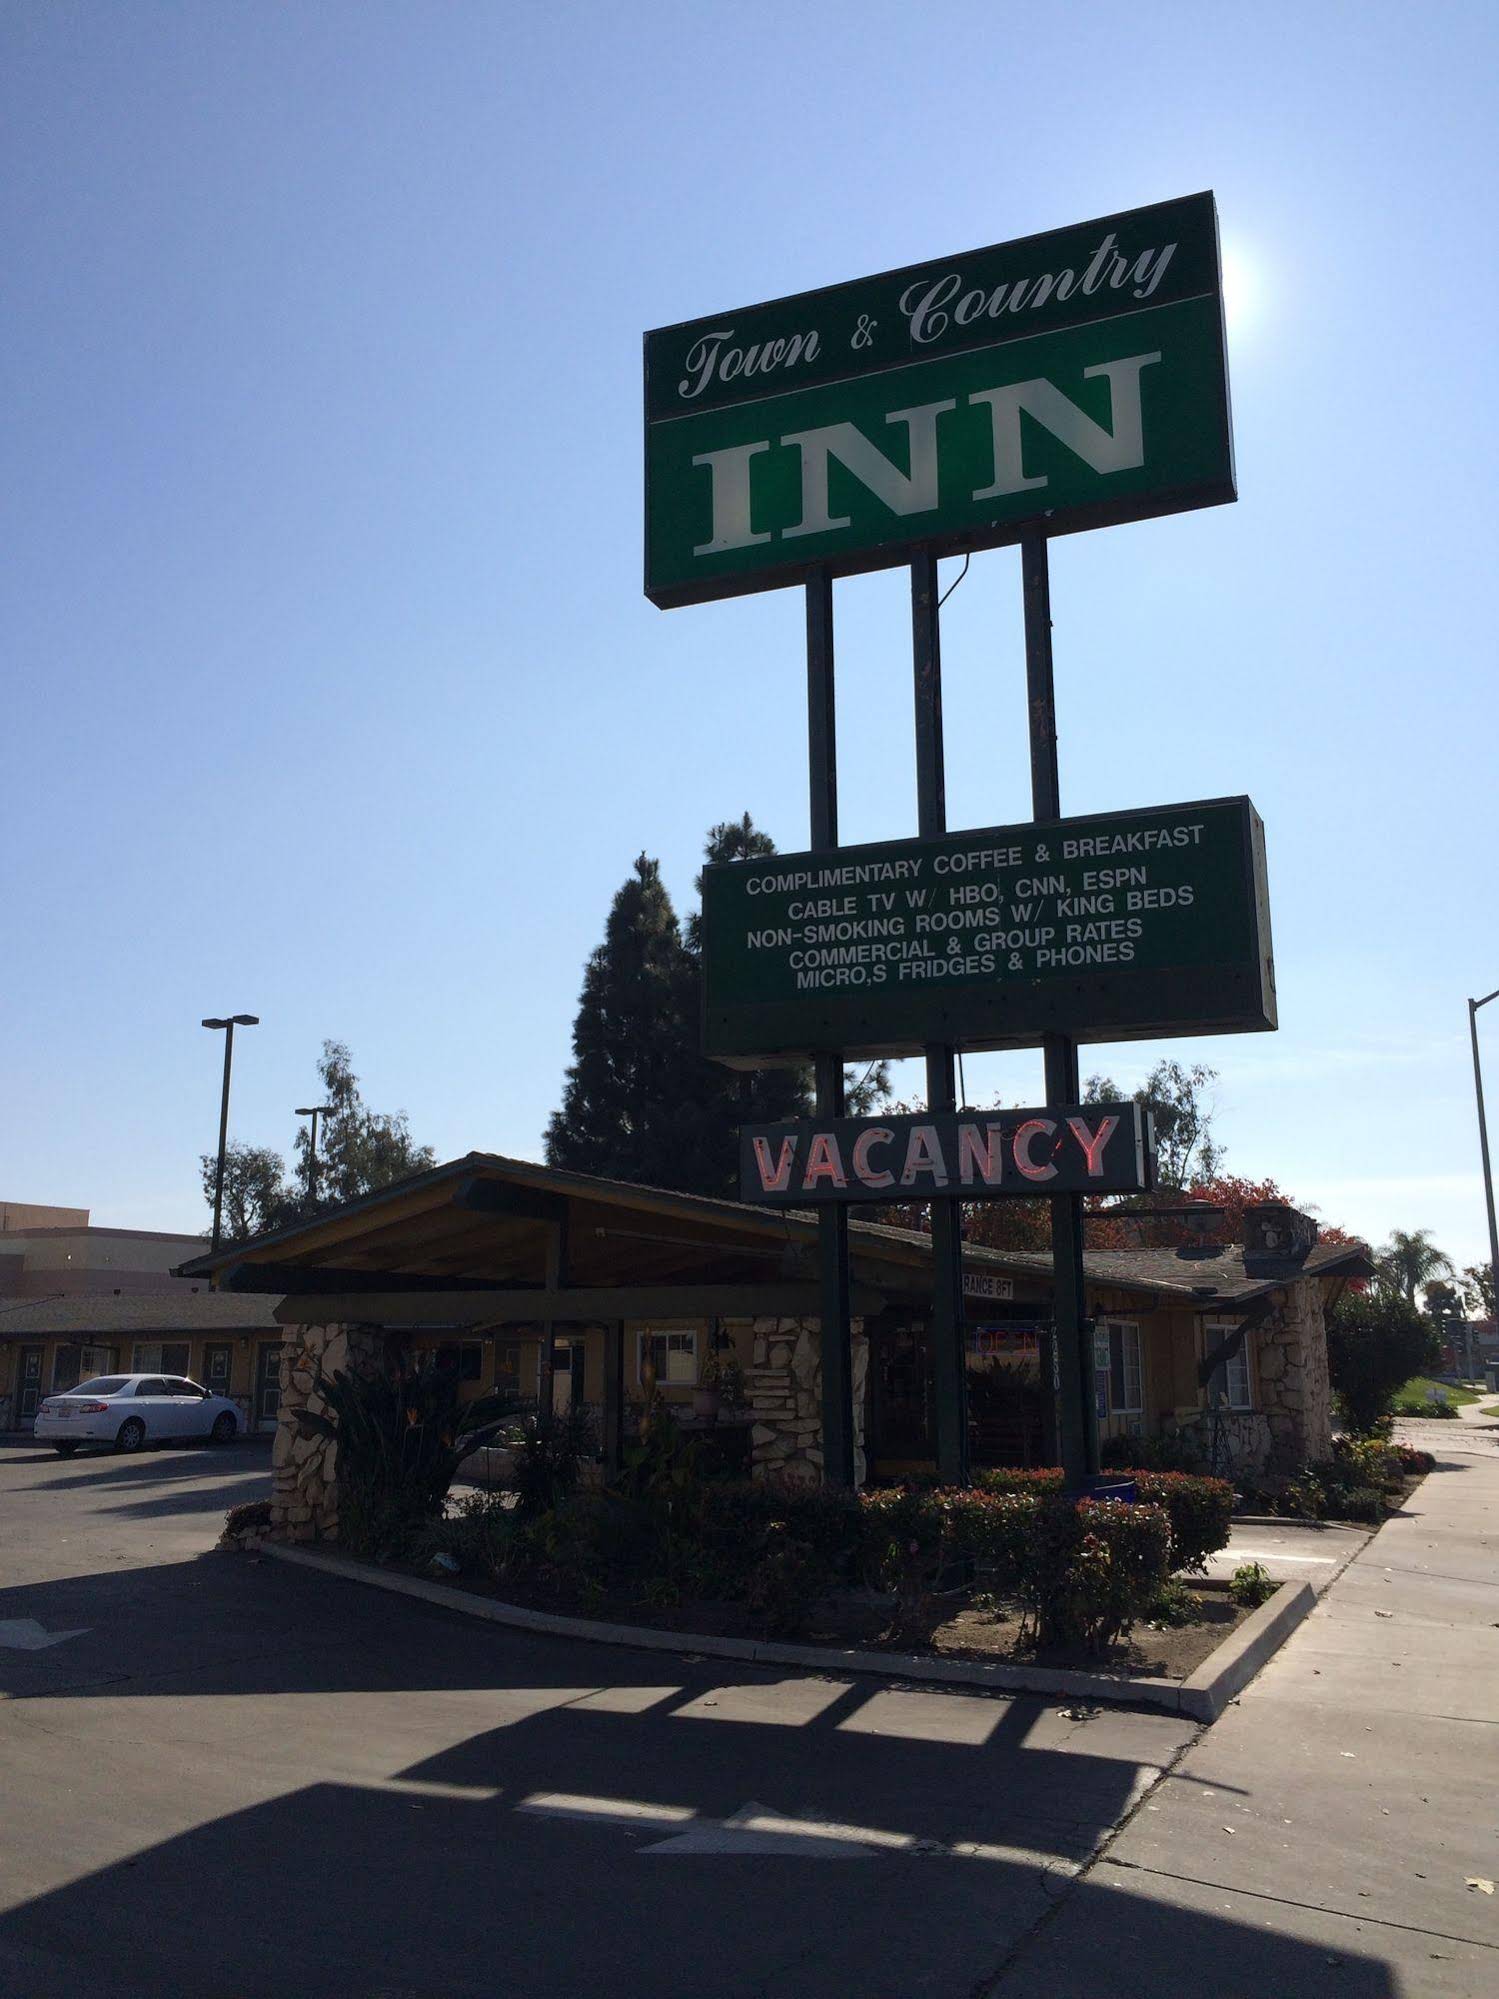 Town and Country Inn